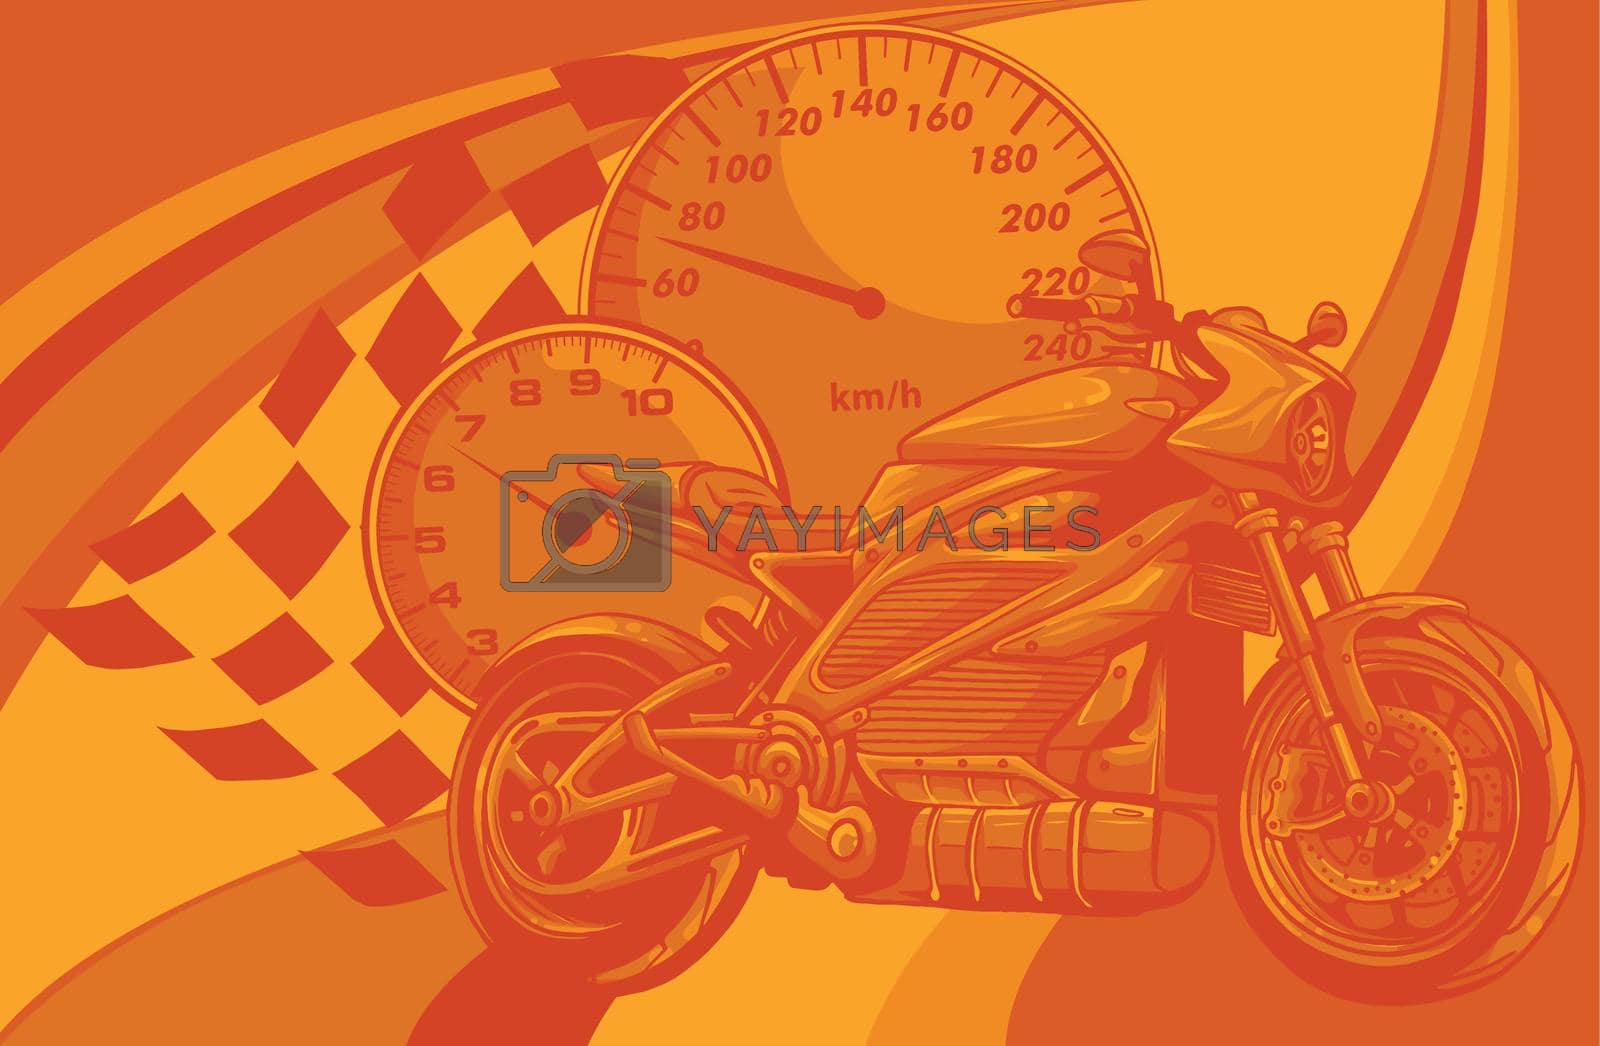 Royalty free image of a Motorcycle racer sport vector illustration design by dean